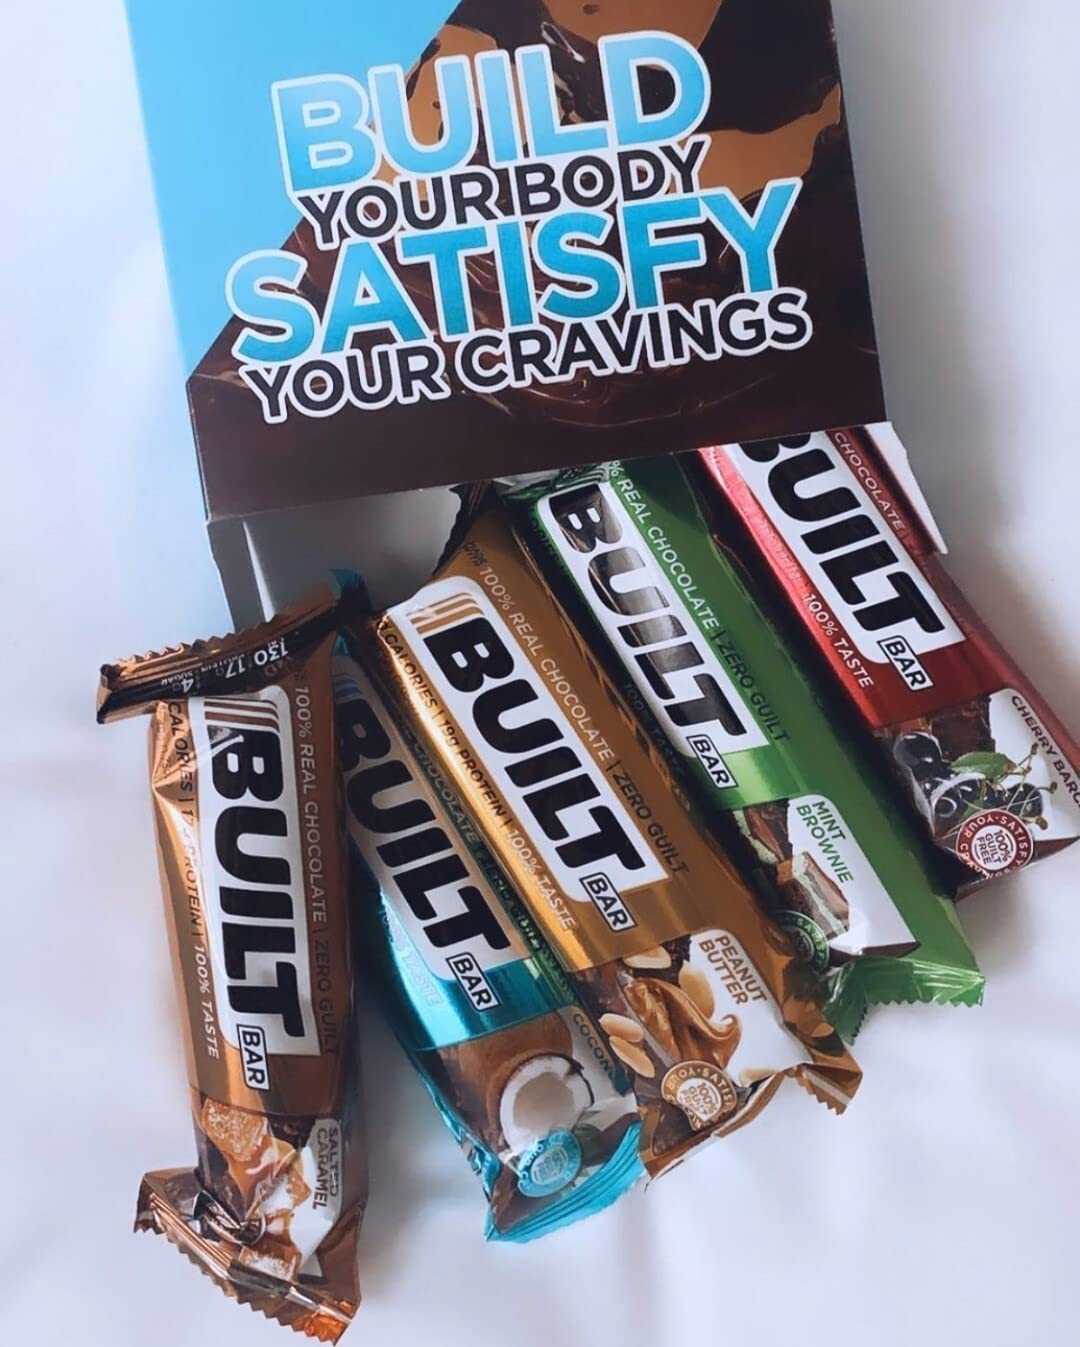 Built Bar 18 Bar Variety Pack Protein and Energy Bars - 100% Real Chocolate - High Protein, Whey and Fiber - Low Carb, Low Calorie, Low Sugar - Gluten Free (9 Flavor Mixed Box of Built Bars)